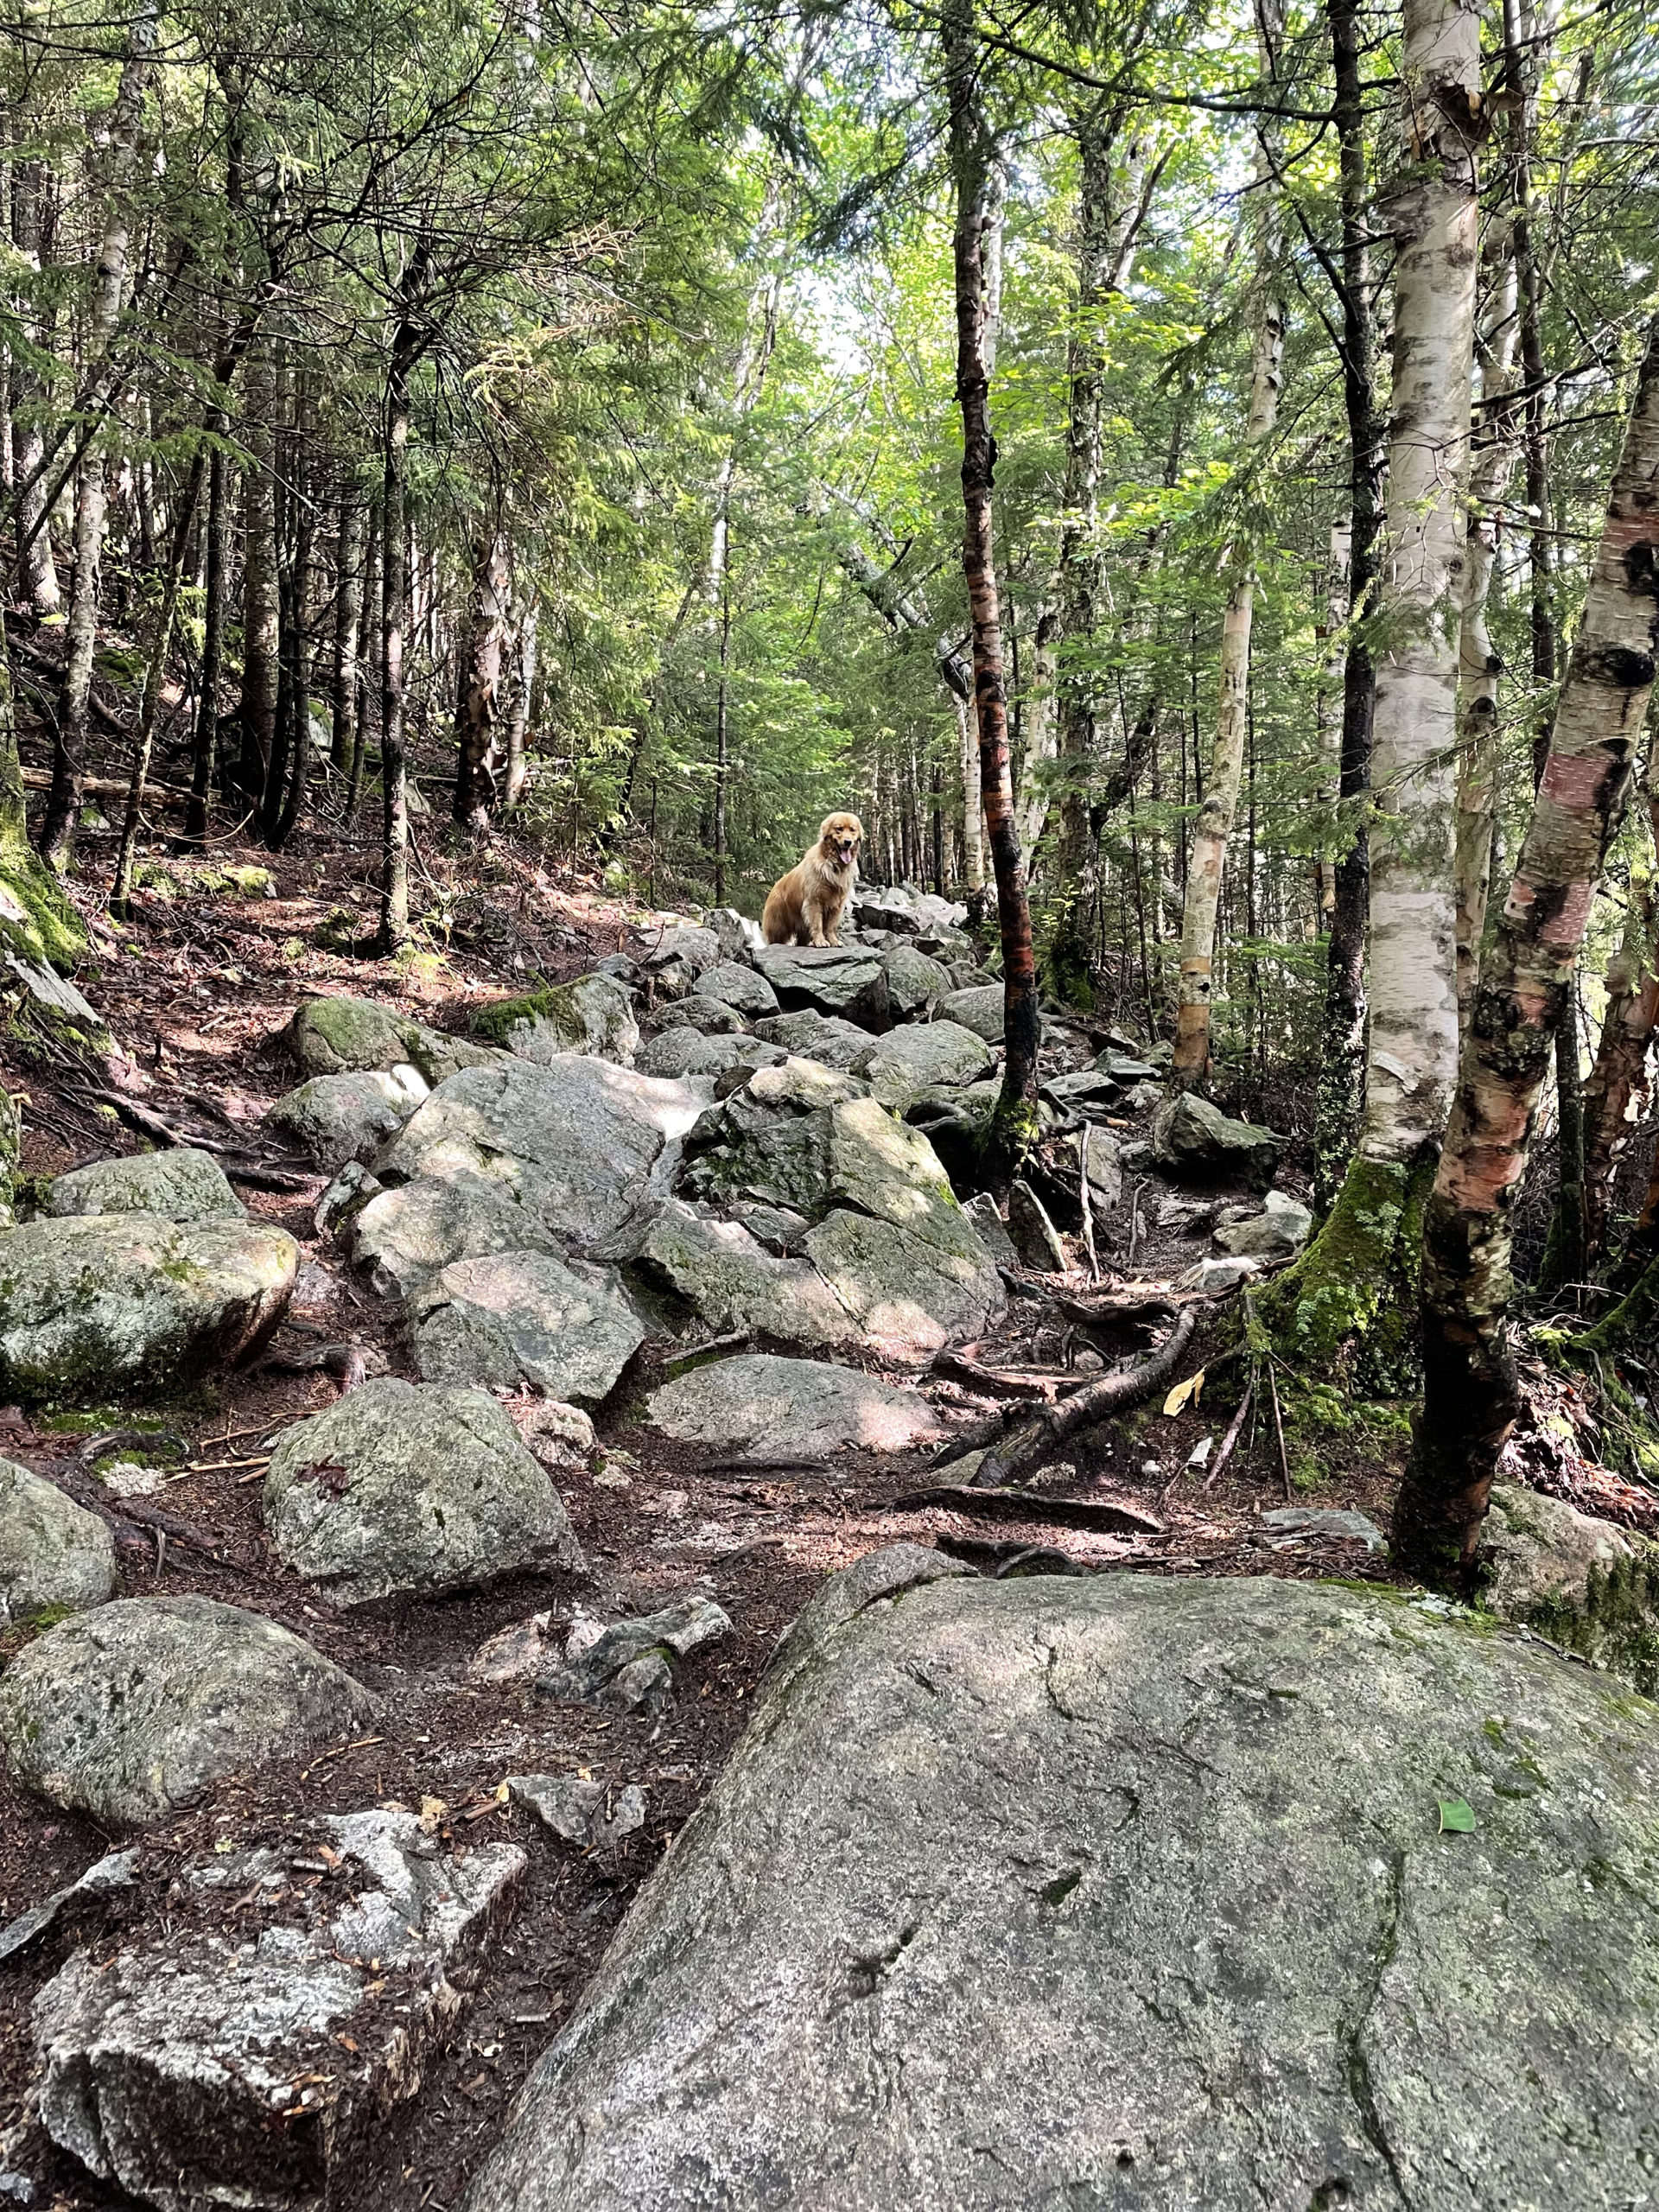 Dog on rocky trail, hiking Mt. Osceola in the White Mountain National Forest, New Hampshire